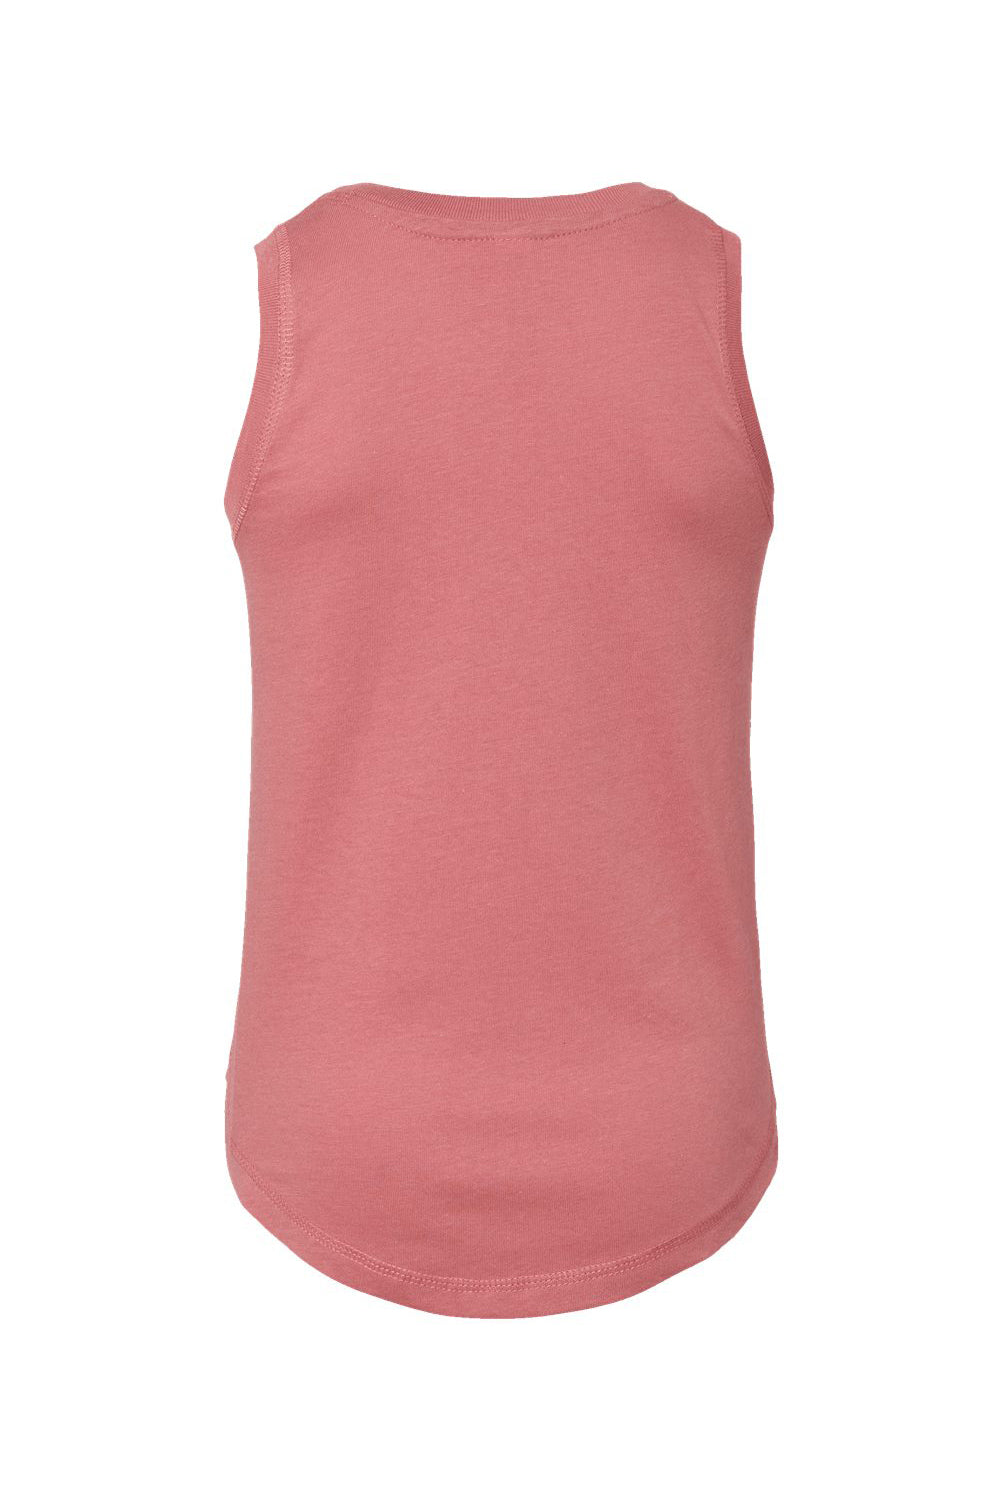 LAT 2692 Youth Girls Relaxed Fine Jersey Tank Taop Mauvelous Pink Flat Back